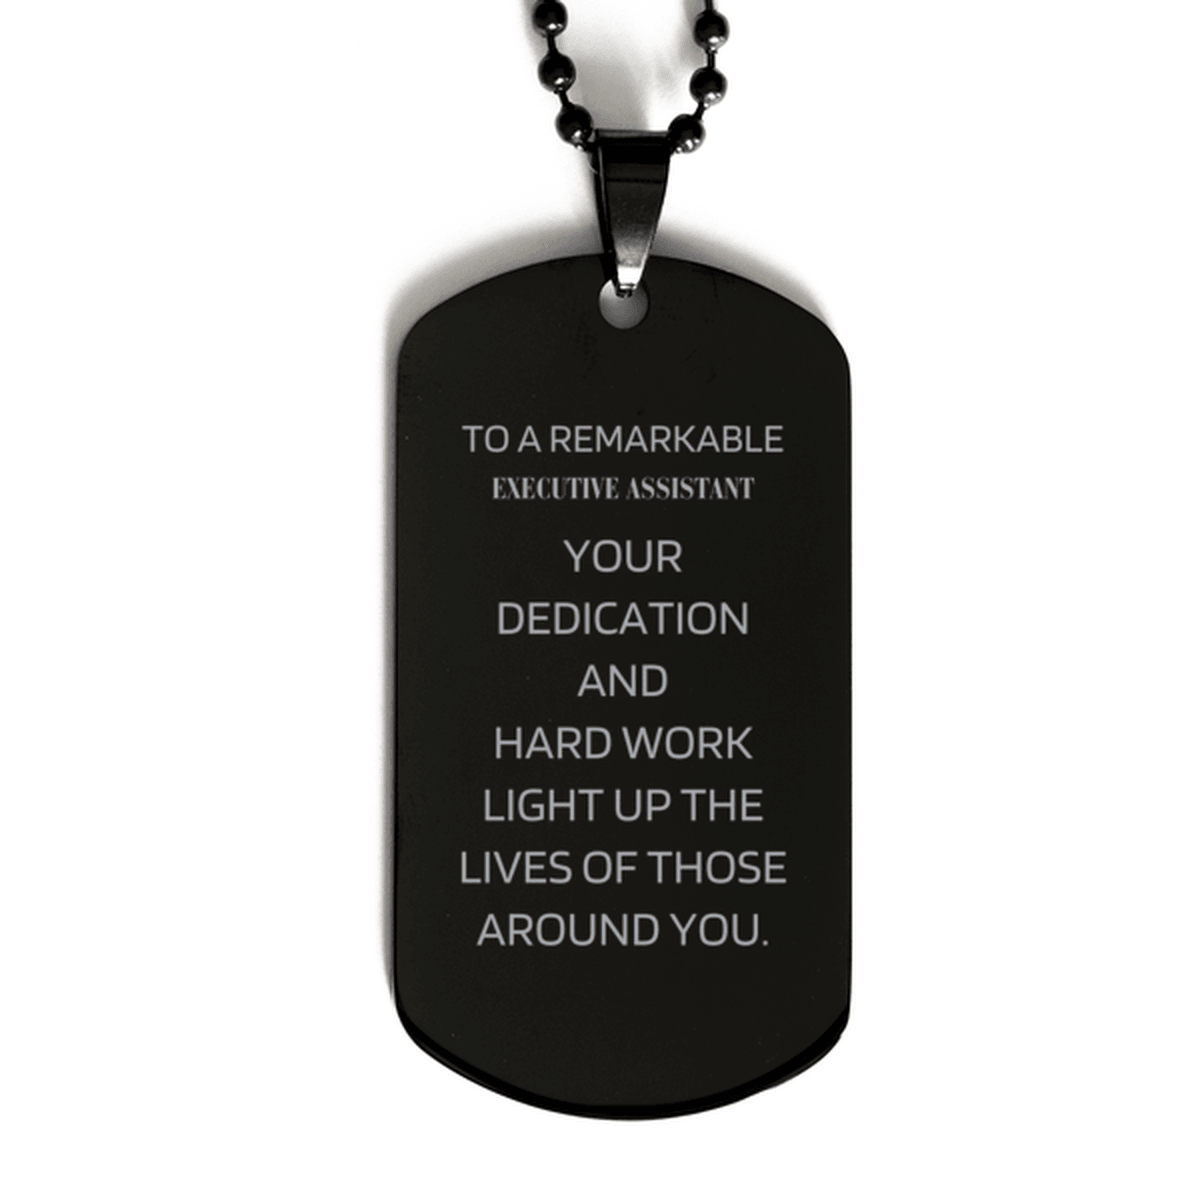 Remarkable Executive Assistant Gifts, Your dedication and hard work, Inspirational Birthday Christmas Unique Black Dog Tag For Executive Assistant, Coworkers, Men, Women, Friends - Mallard Moon Gift Shop